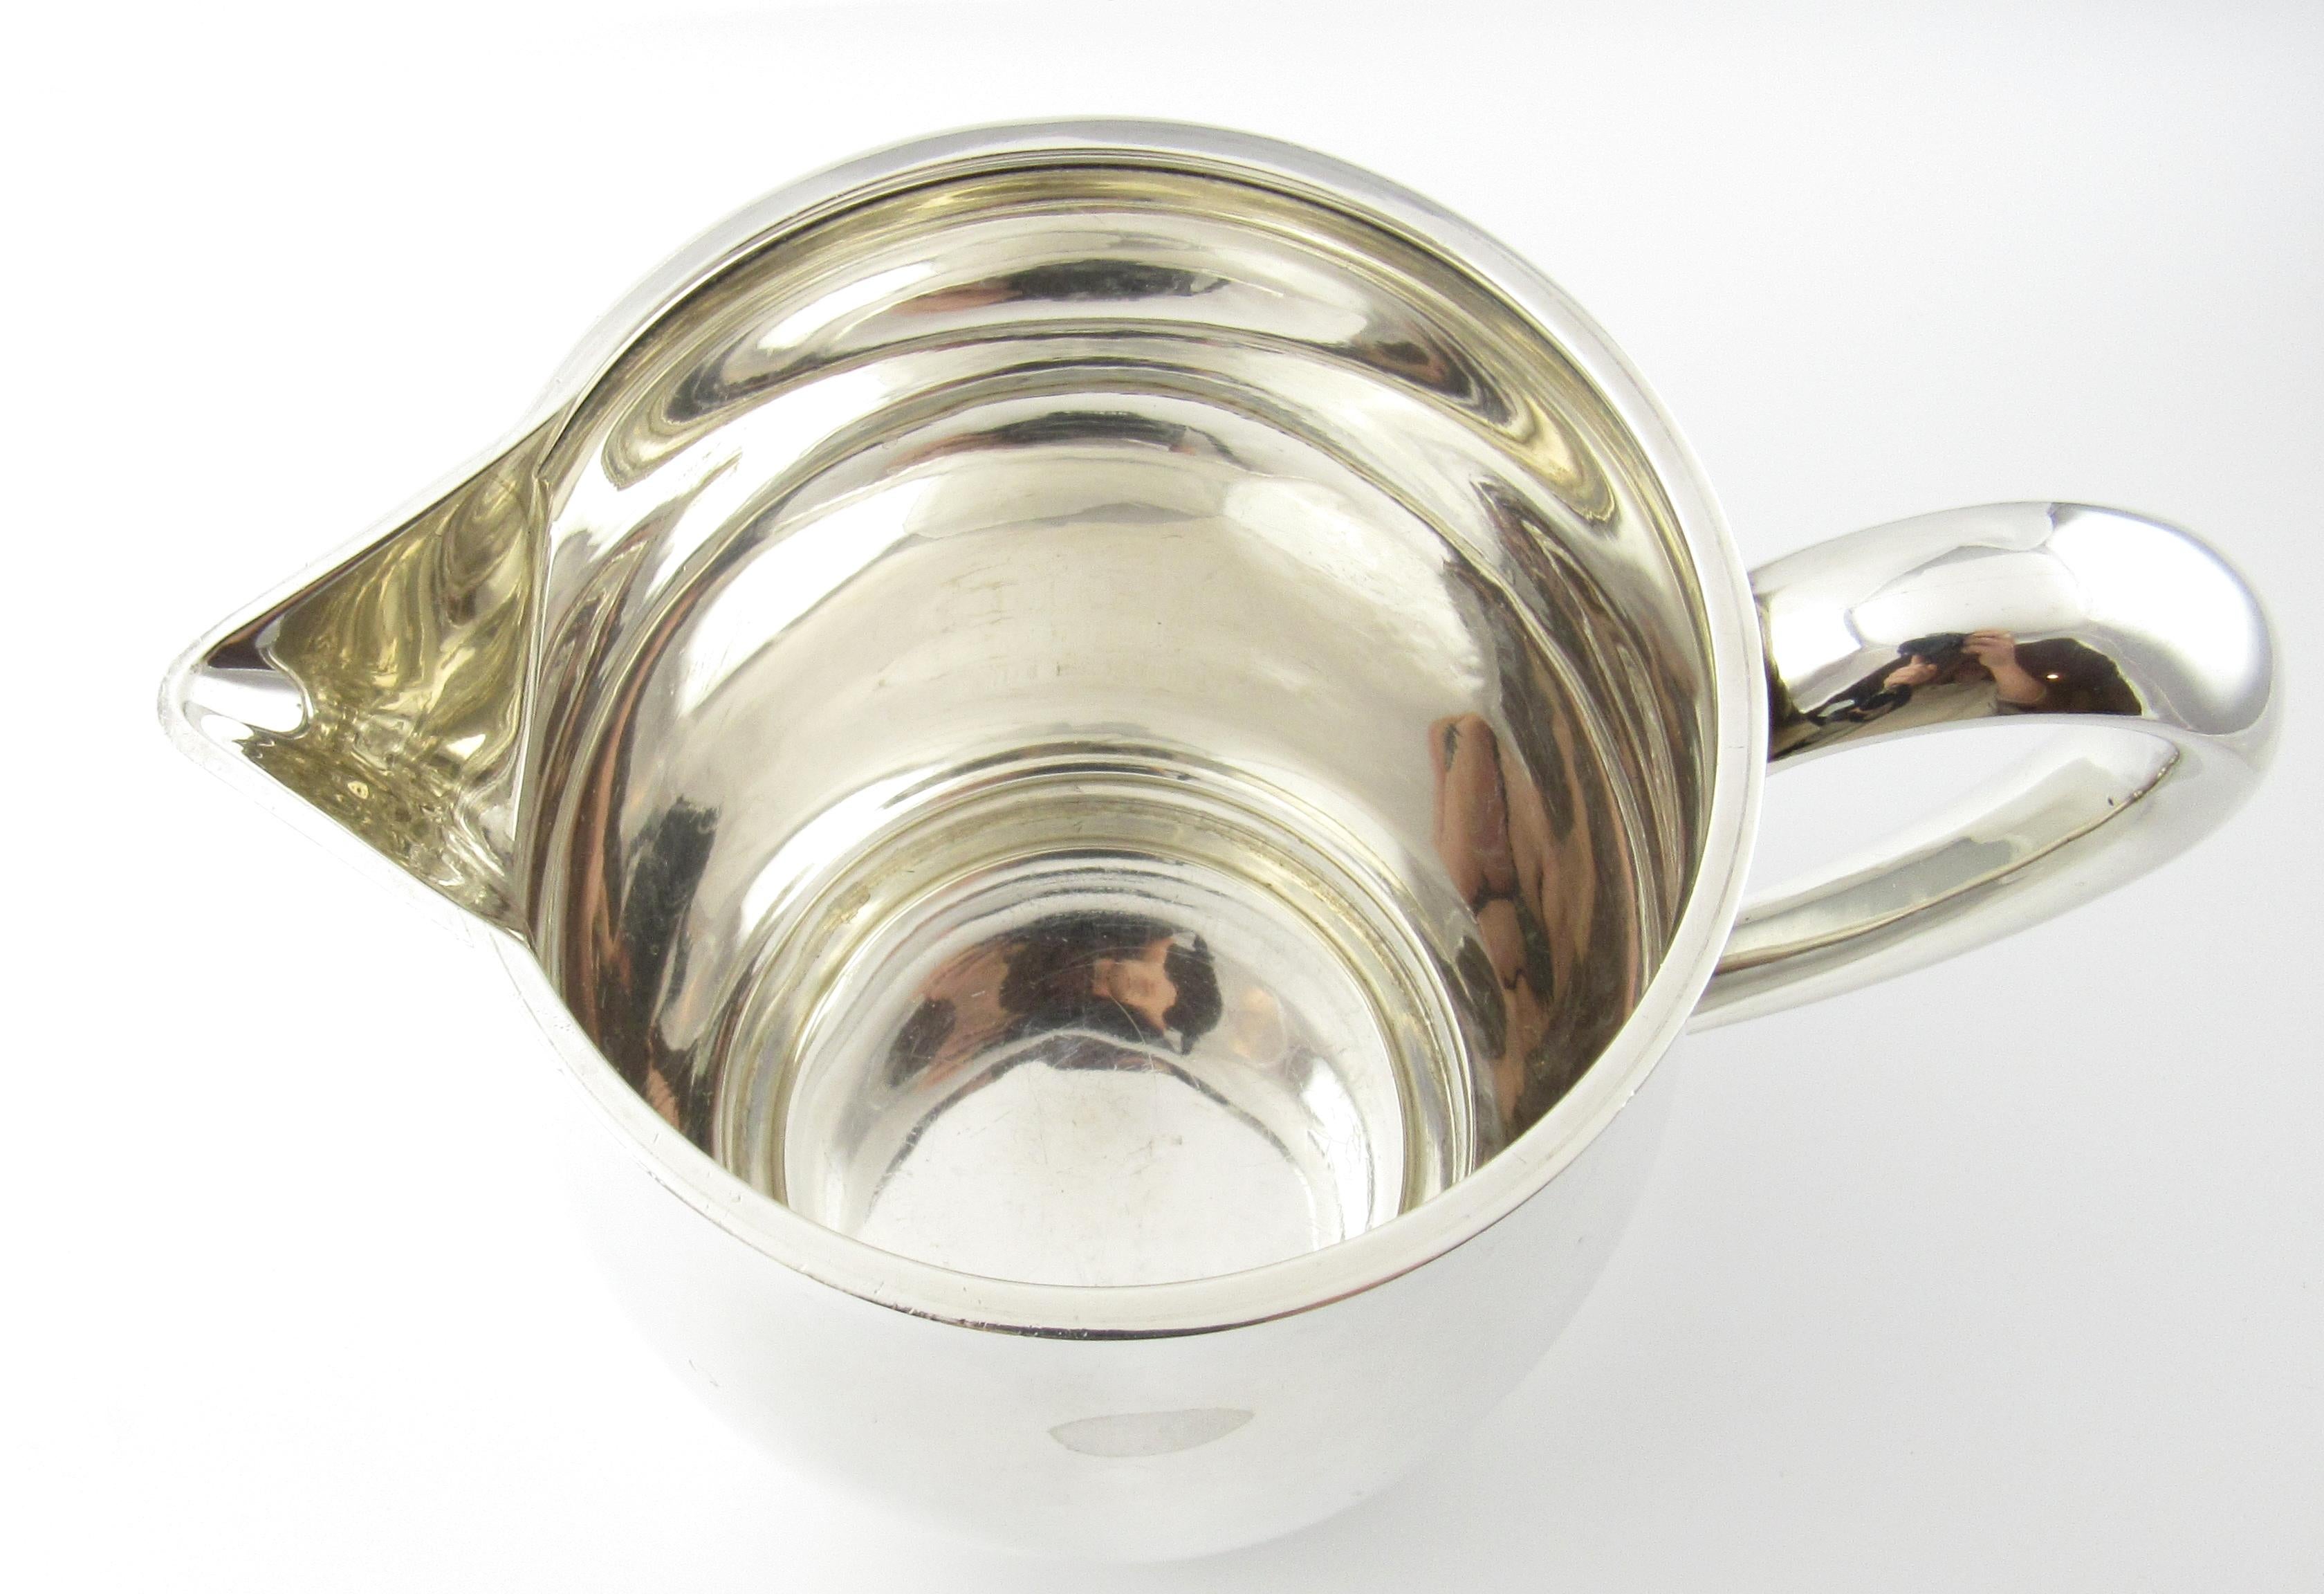 Tiffany & Co. P. Revere reproduction sterling silver pitcher 3 1/2 pints 

This authentic Tiffany & Co. sterling silver pitcher is approximate 6.75